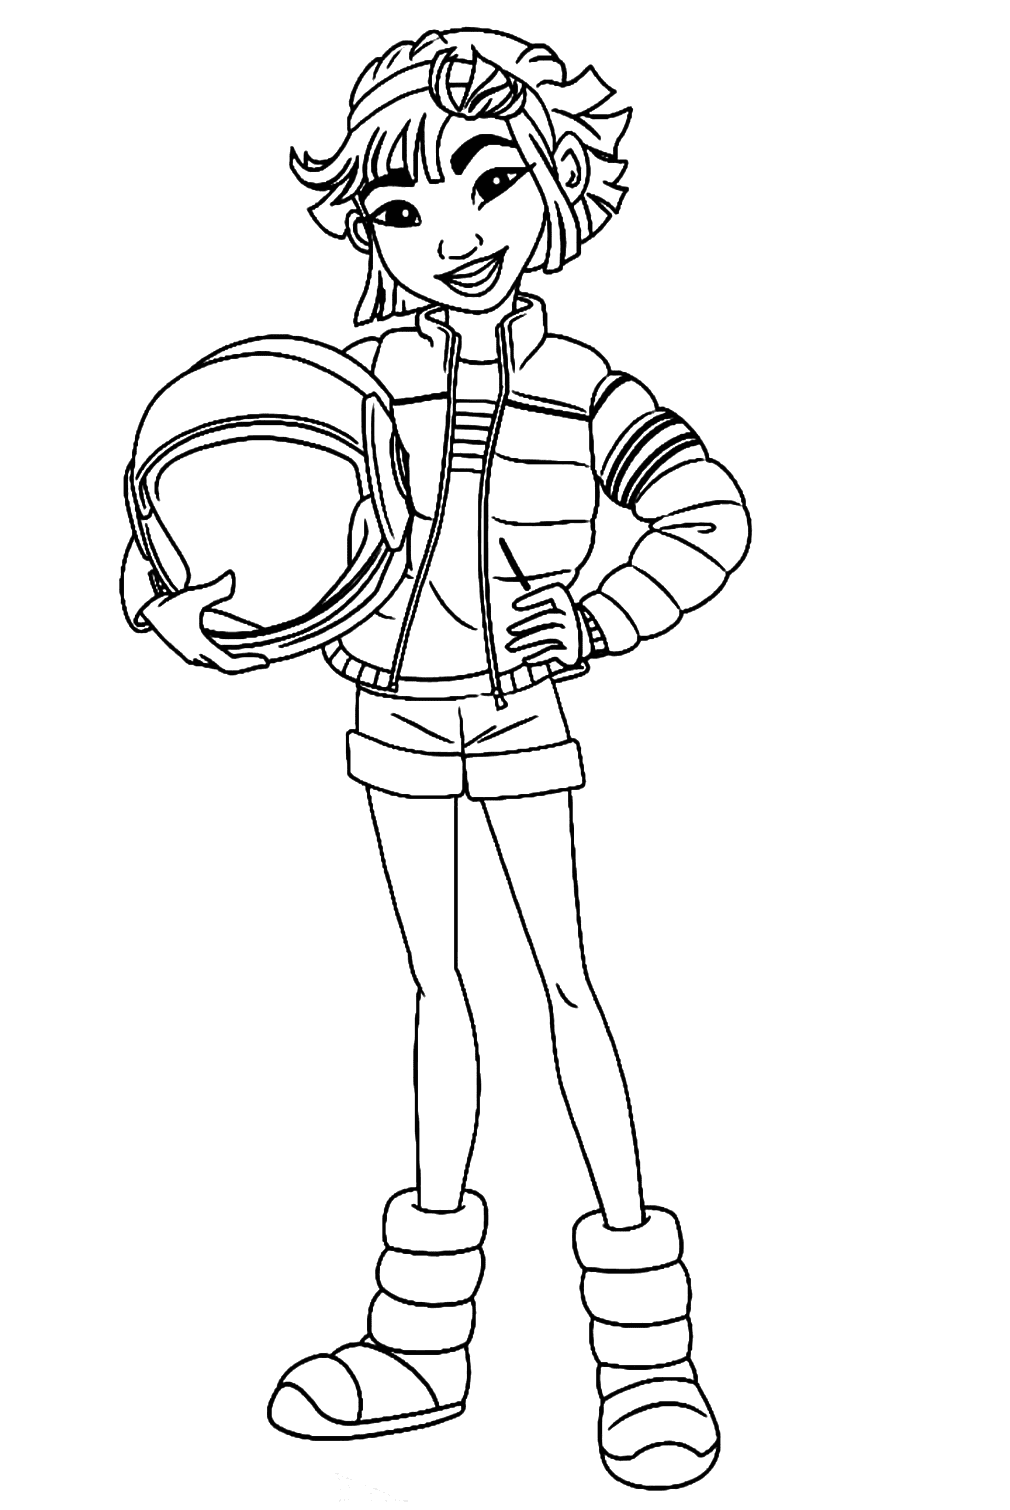 Fei Fei From Over the Moon Coloring Pages